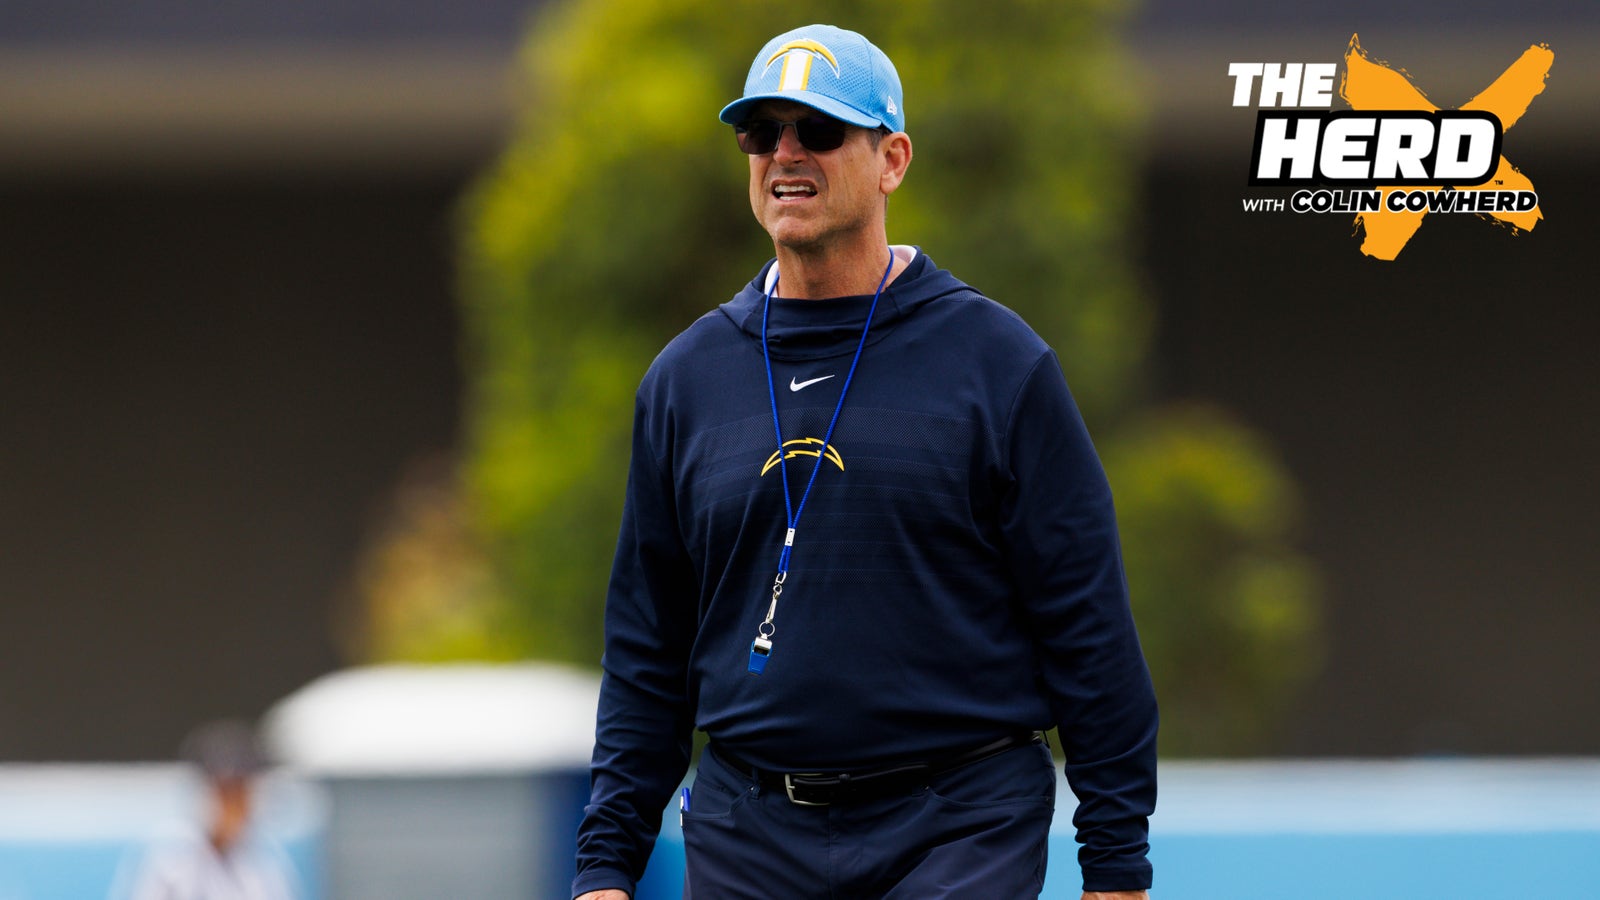 What are the expectations for the Chargers and Jim Harbaugh?